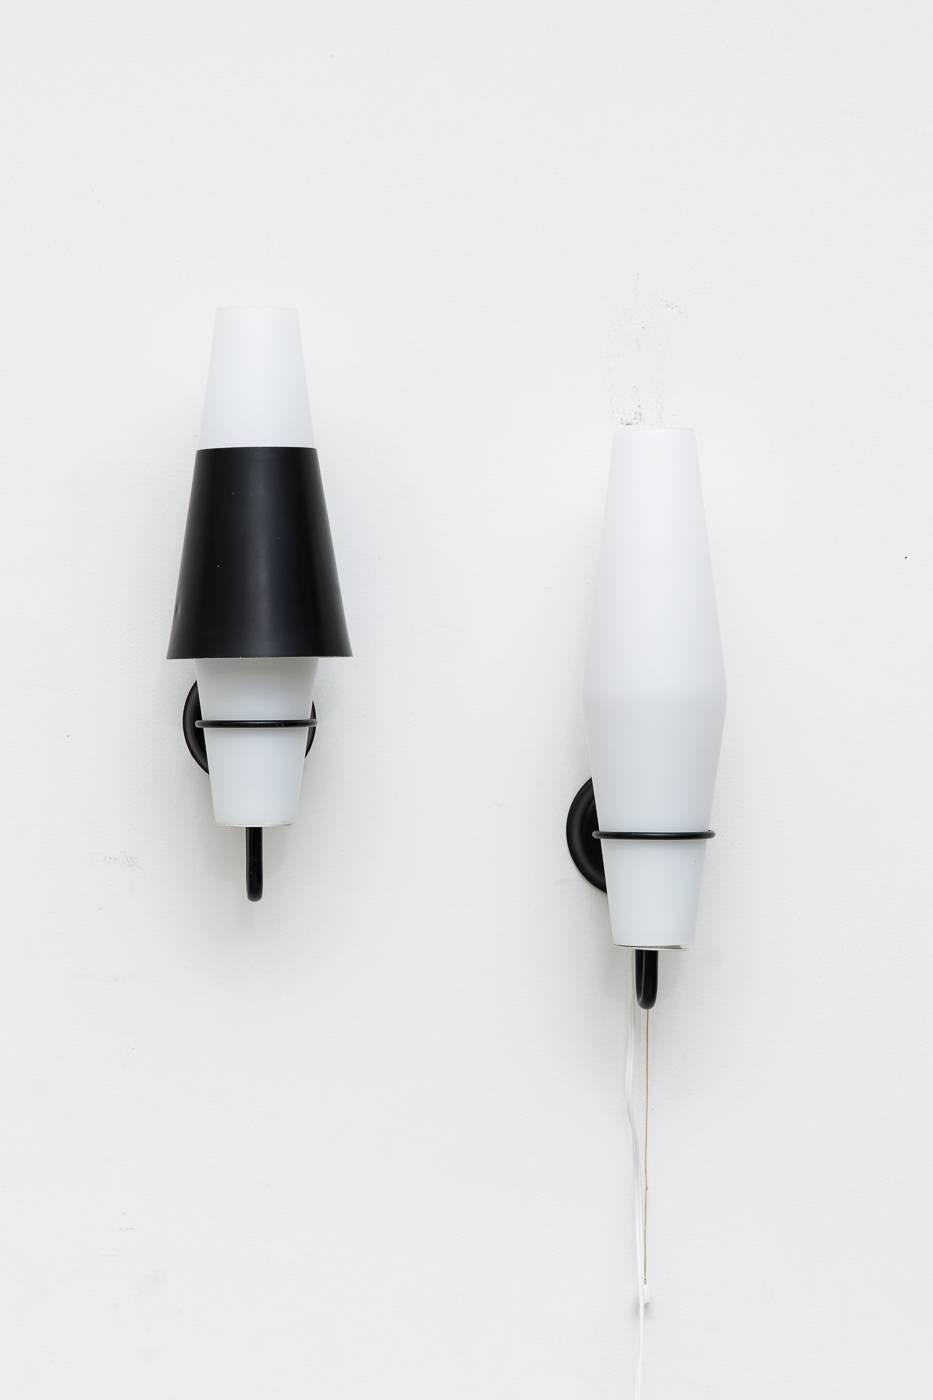 Milk glass shade with enameled metal coned cap. Two available with caps, one with a pull string switch, one is ready for hard wire. Nut caps vary.